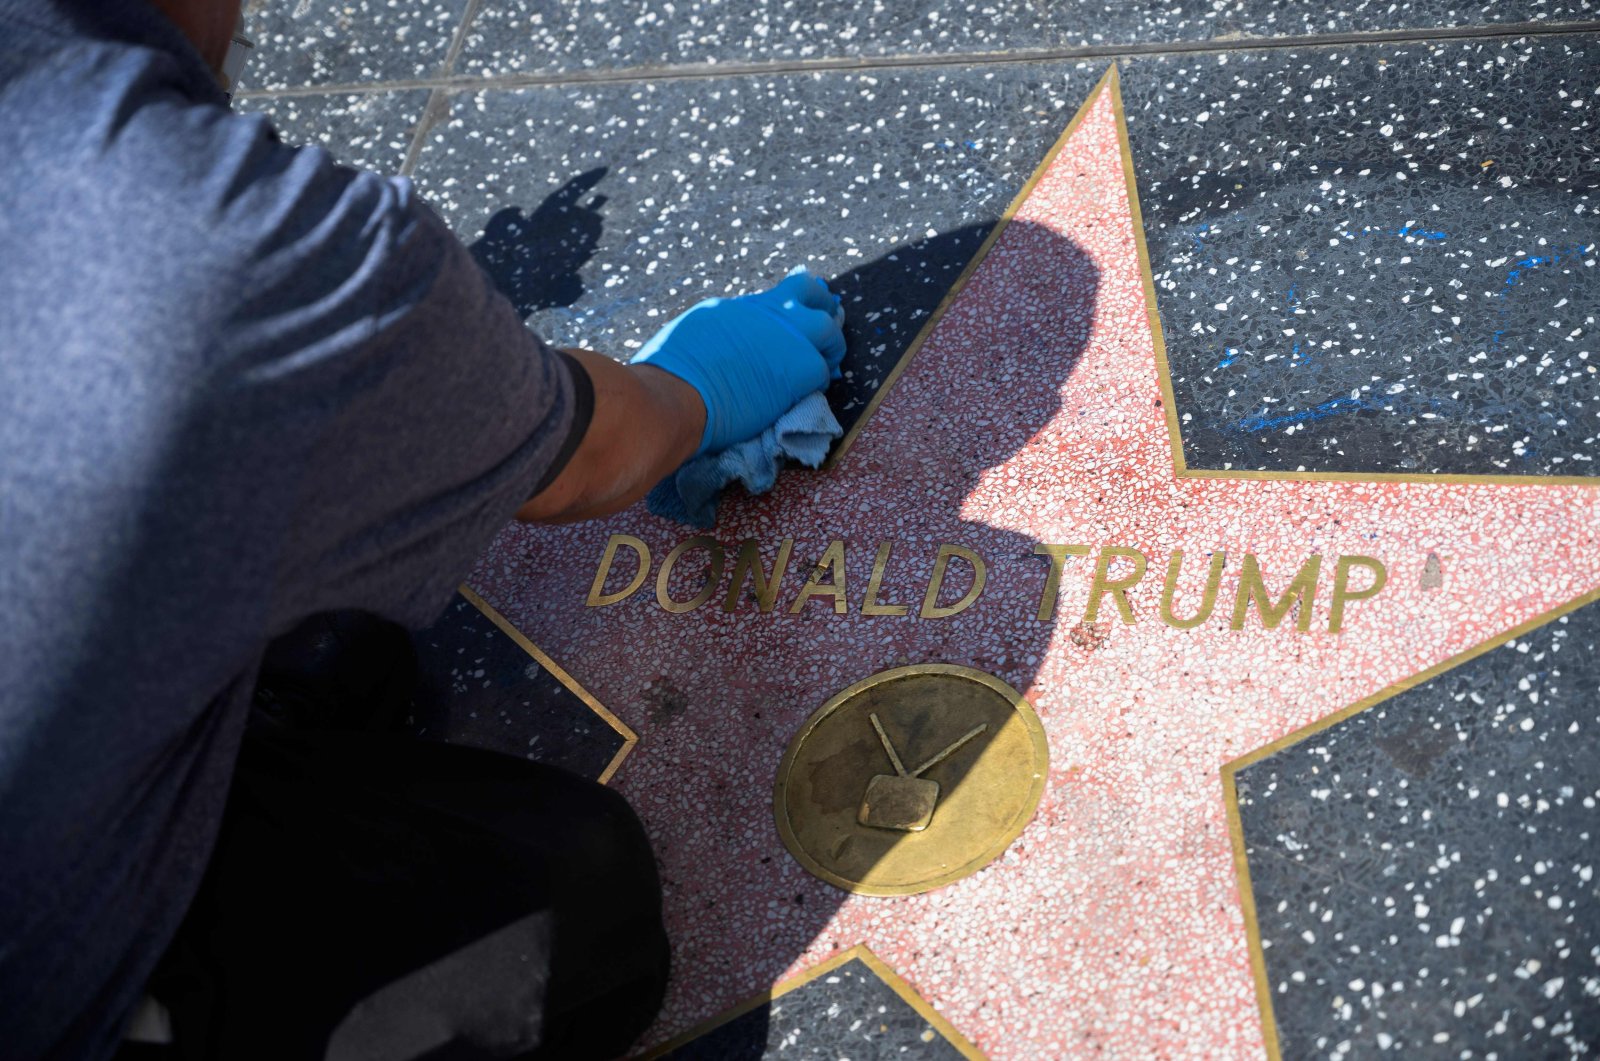 In this file photo a maintenance worker uses cleaning product to remove graffiti after Donald Trump's star on the Hollywood Walk of Fame was defaced, in a mostly empty Hollywood, California, April 23, 2020, during the coronavirus COVID-19 pandemic. (AFP Photo)